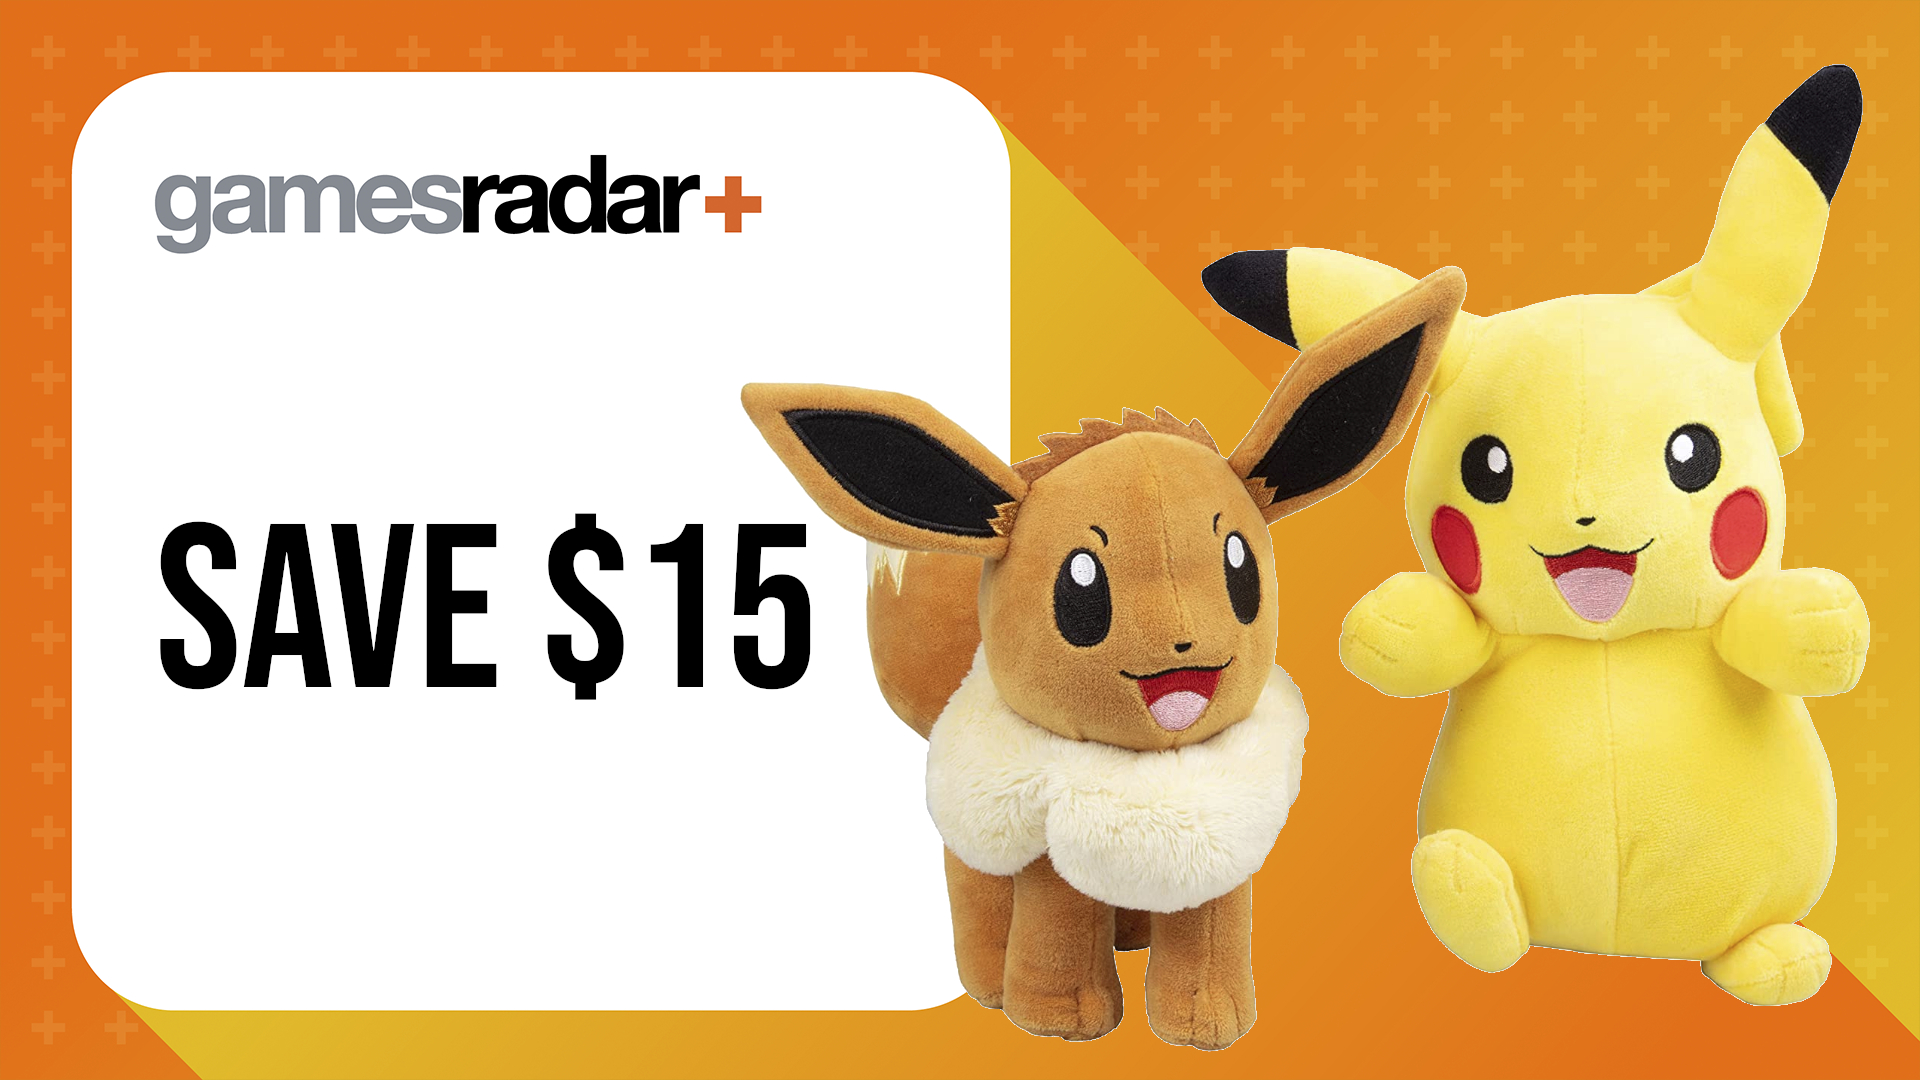 Black Friday toy deals with Pikachu and Eevee plush